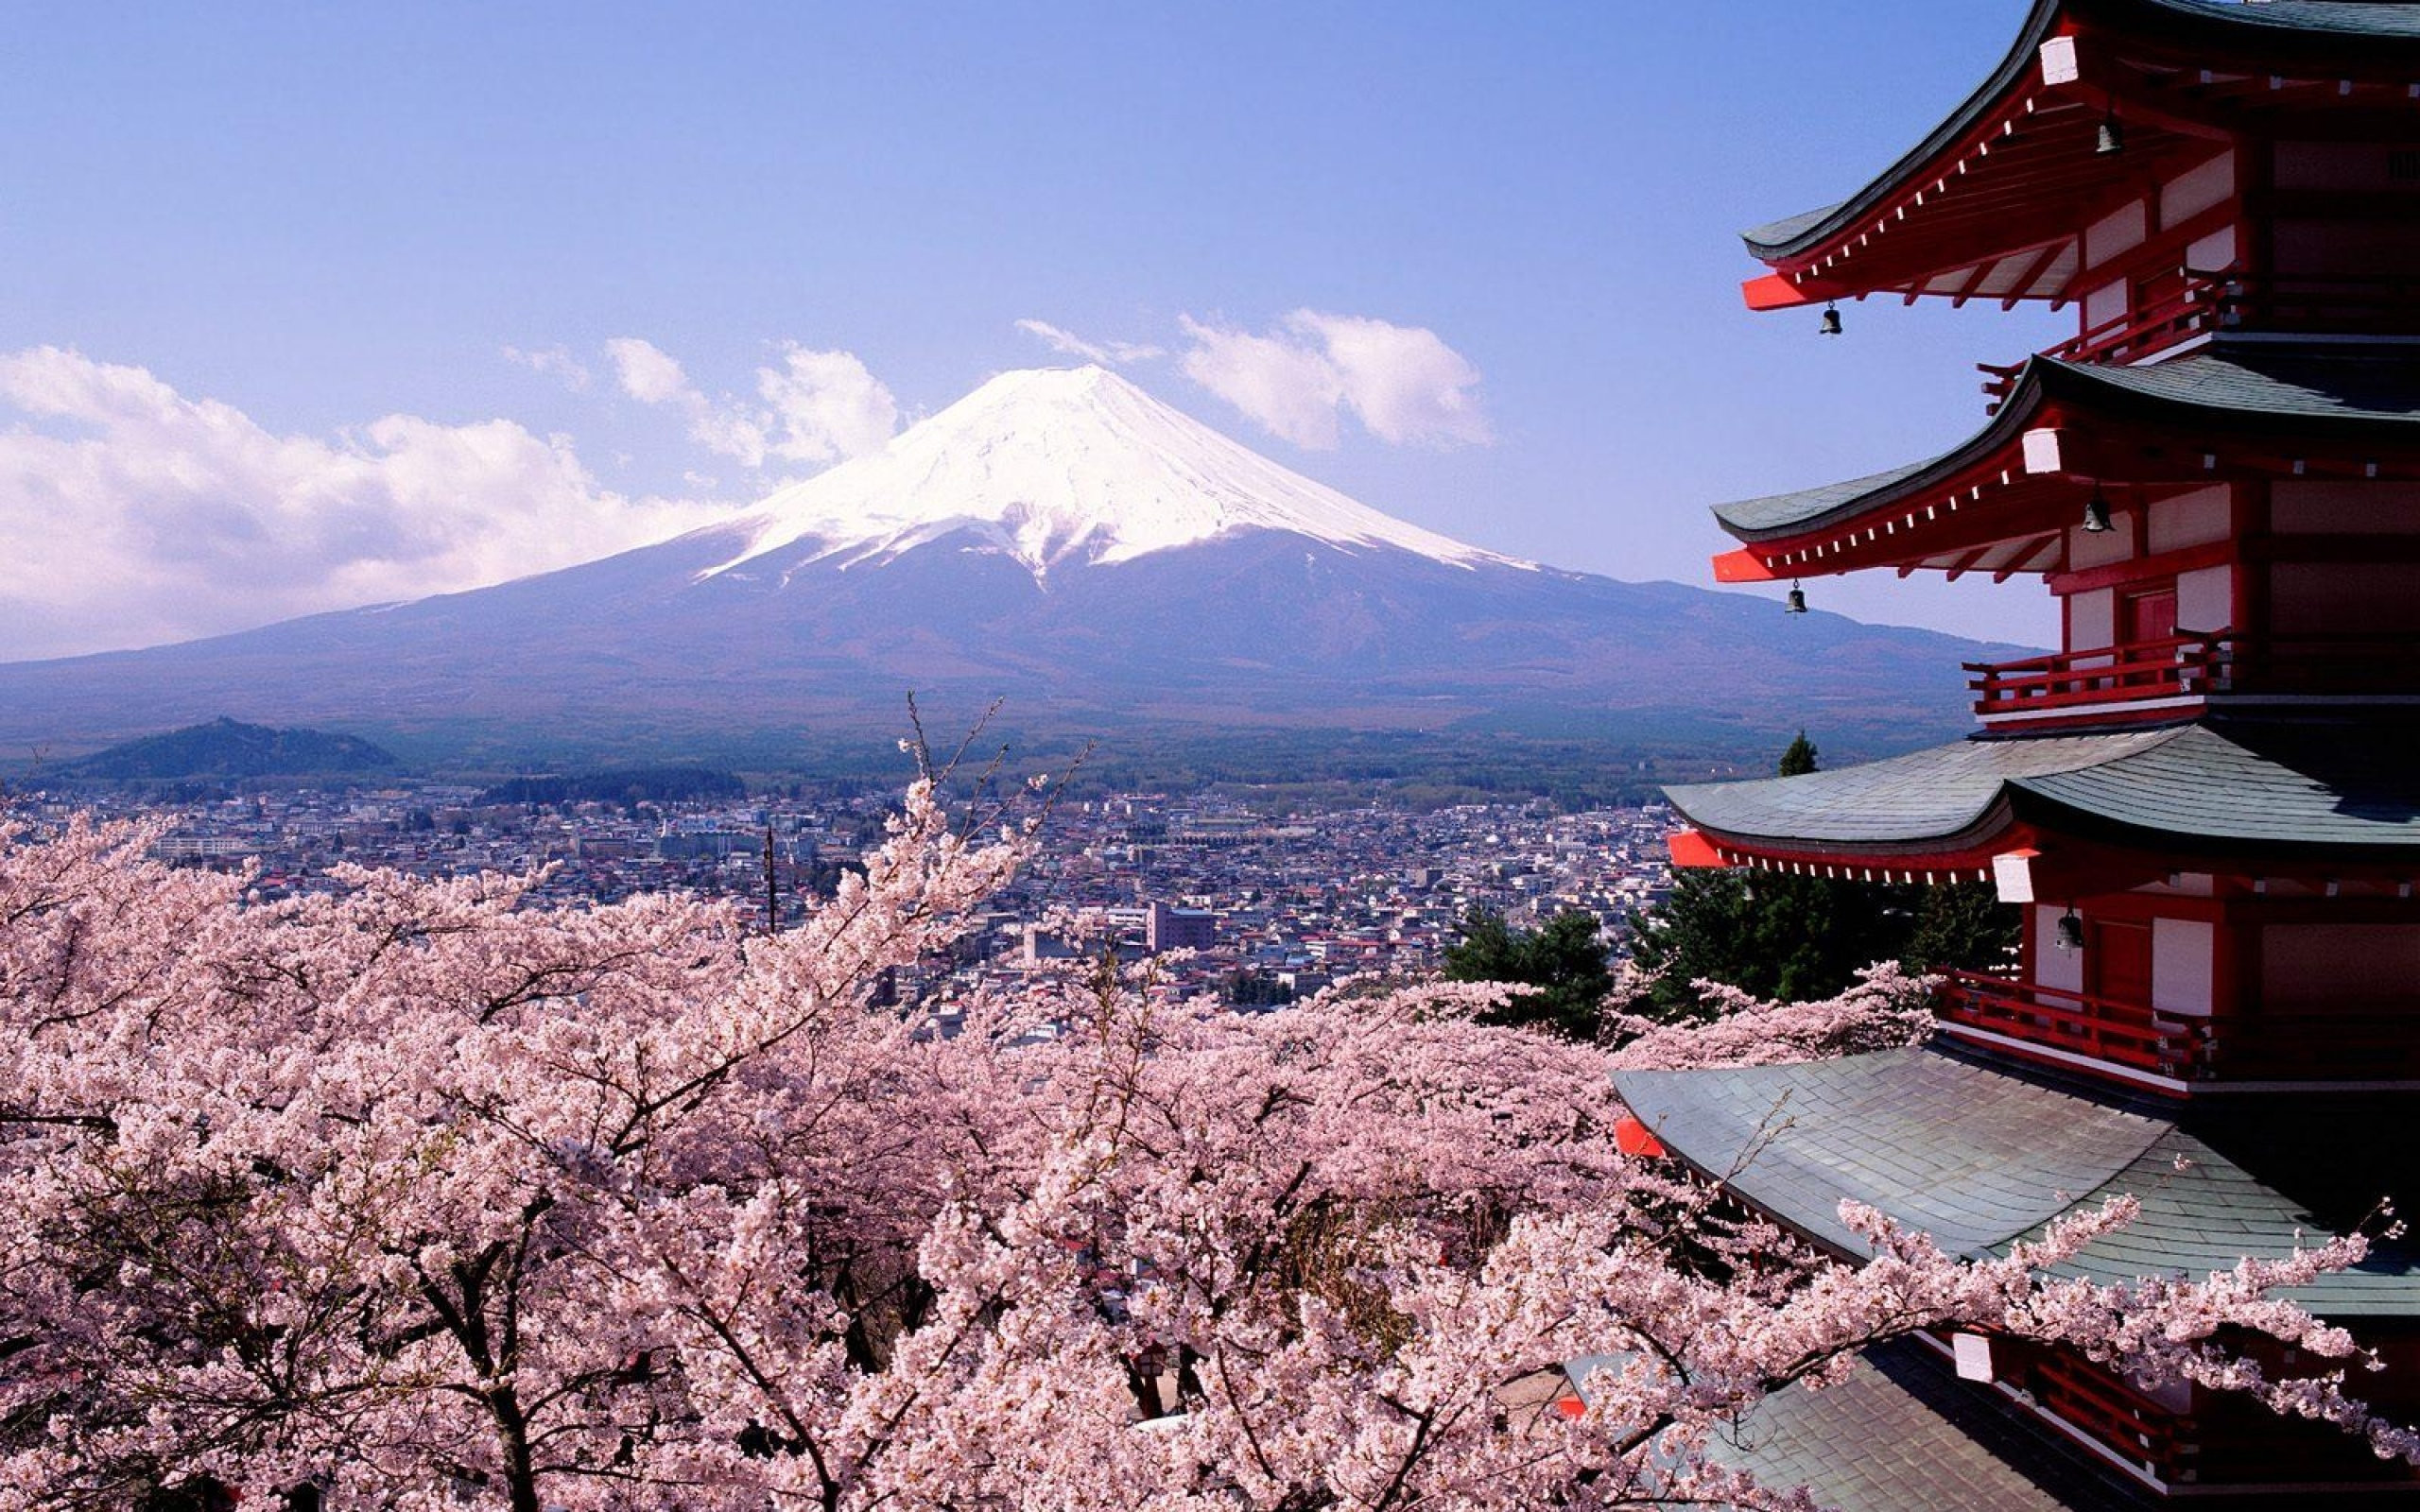 2560x1600 Cherry blossoms and mount Fuji - Japan wallpaper |  | 987 |  WallpaperUP